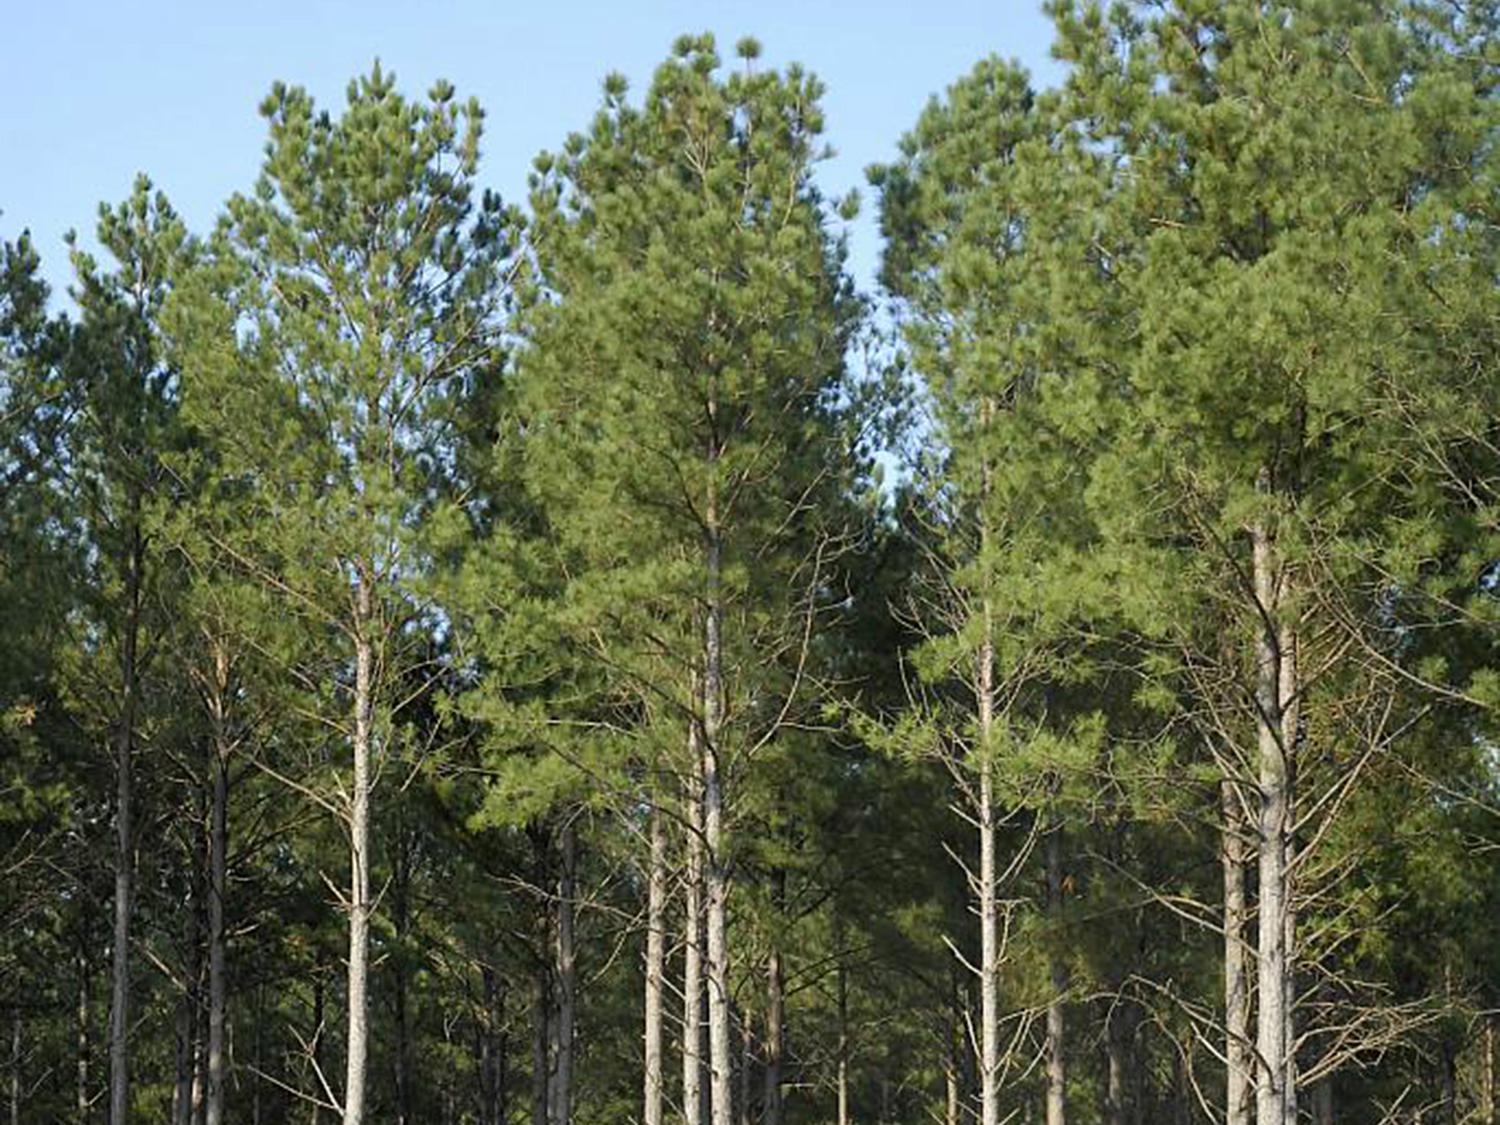 Mississippi's timber industry may see increasing demand for Southern pine lumber as new home construction rates continue to rise. This pine was growing in Monroe County on Sept. 12, 2013. (File photo by MSU Ag Communications/Linda Breazeale)